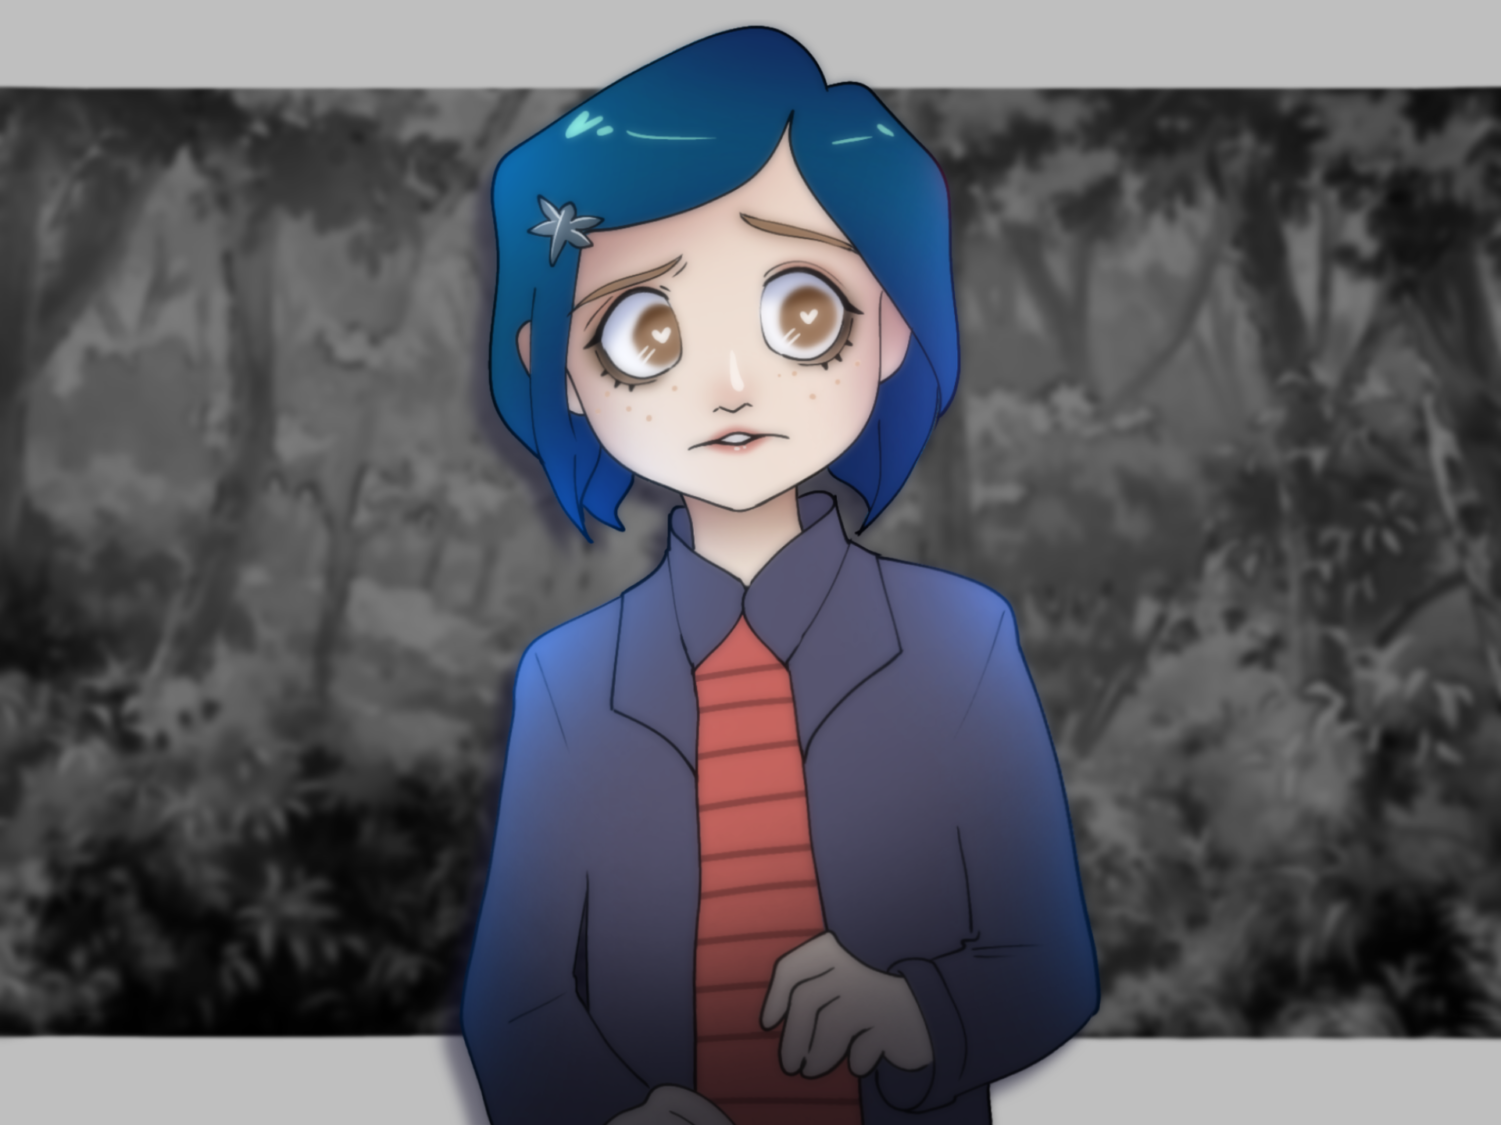 Coraline: Curiosity Killed the Cat – We Are